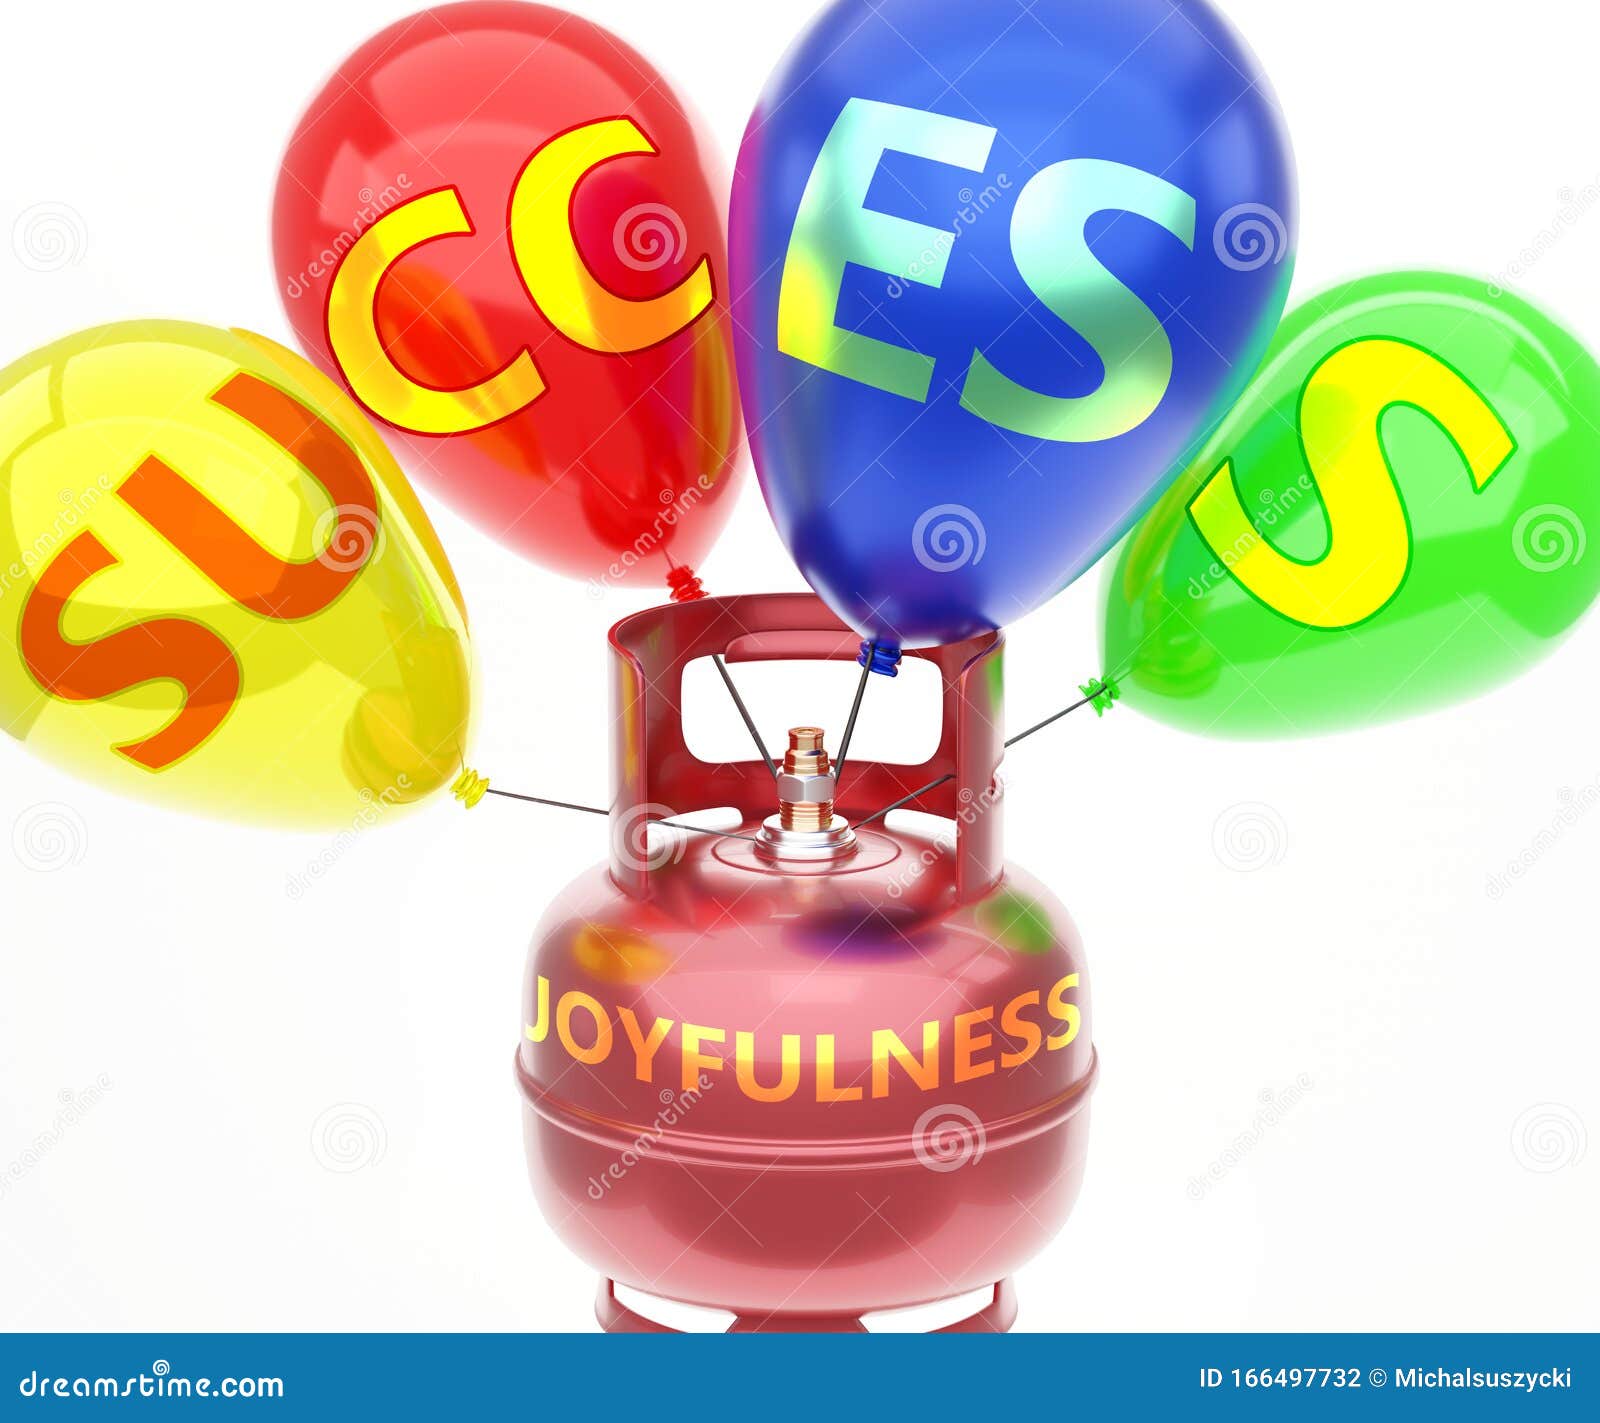 joyfulness and success - pictured as word joyfulness on a fuel tank and balloons, to ize that joyfulness achieve success and